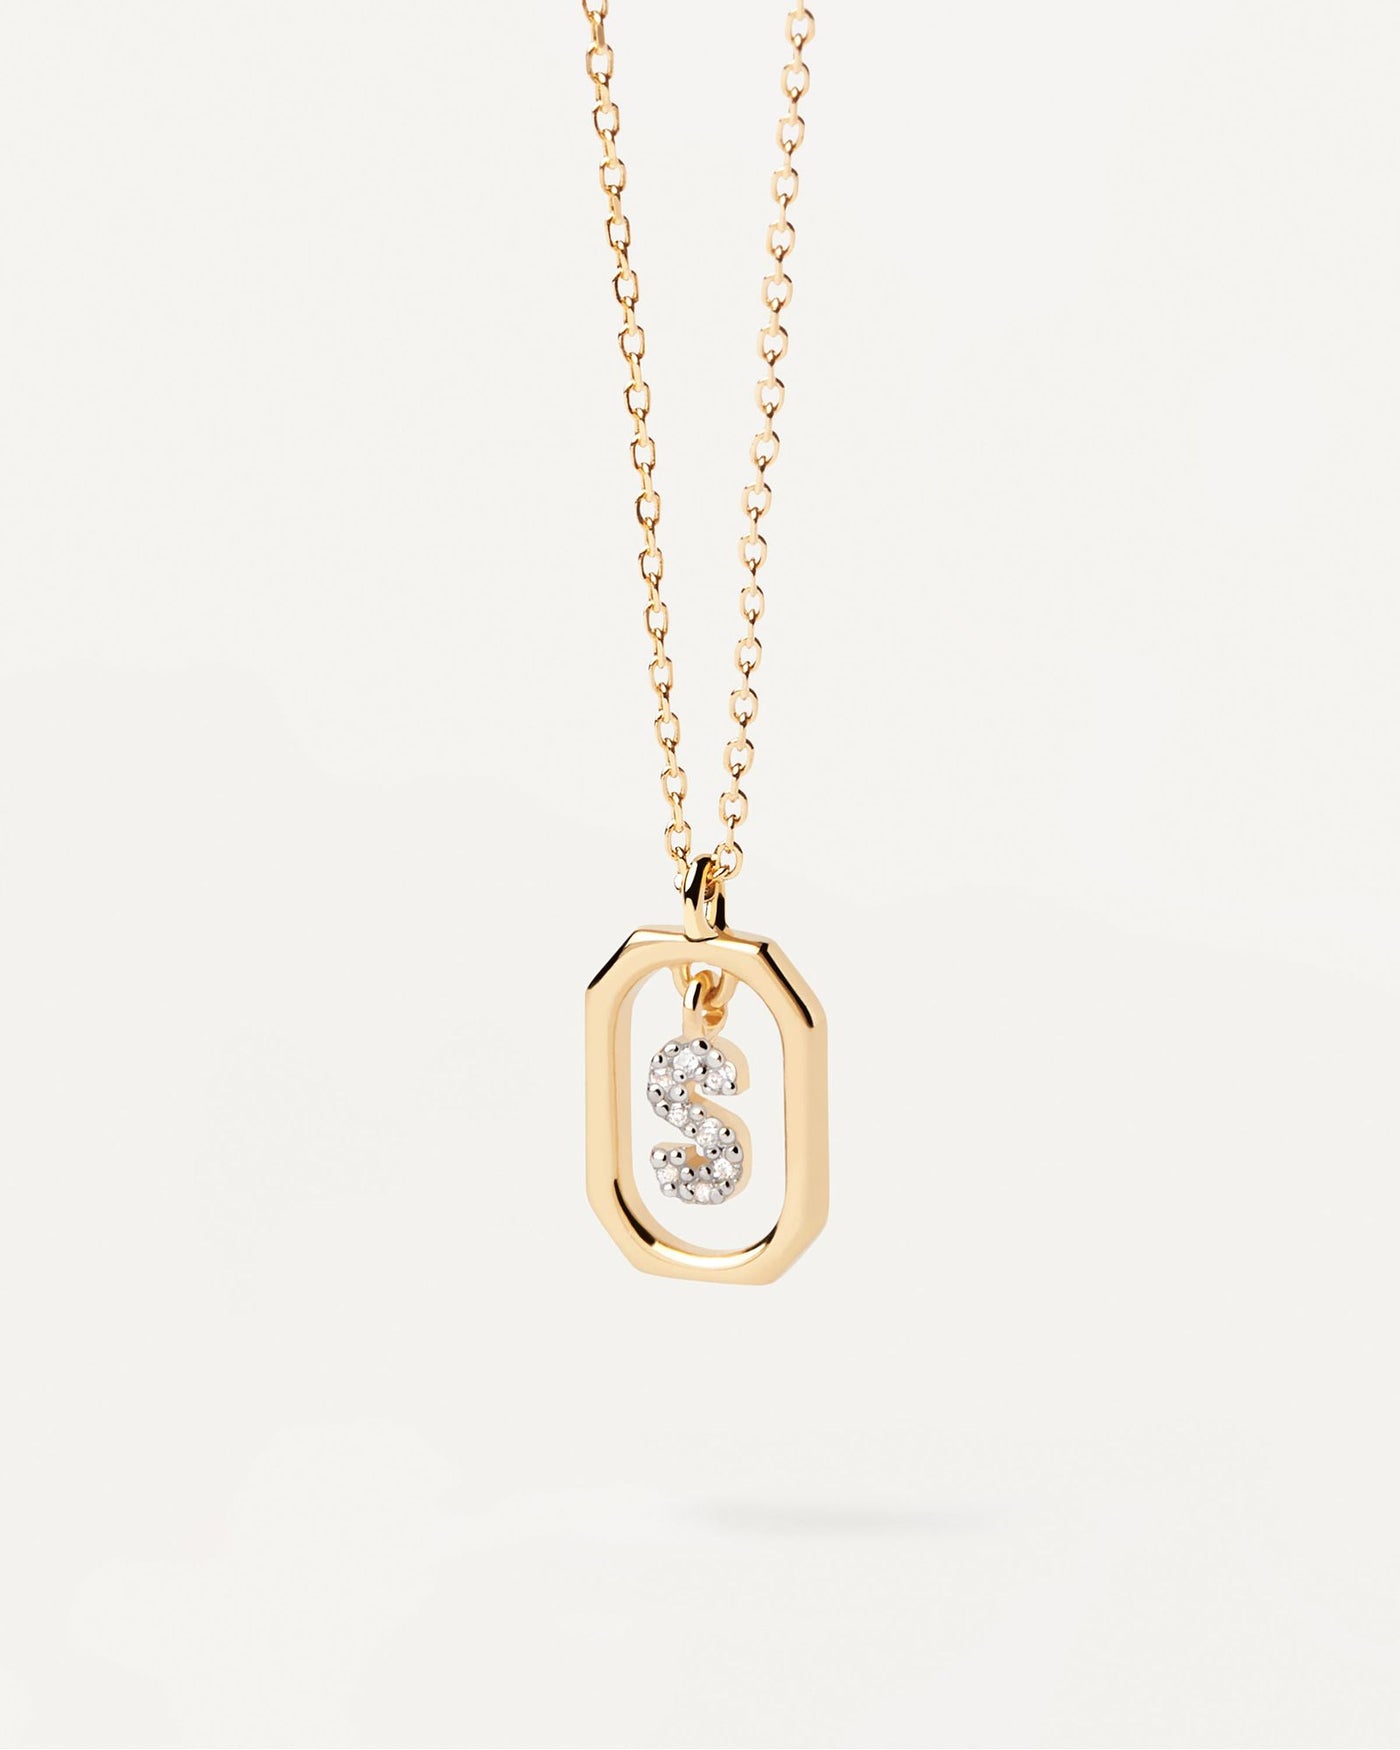 2024 Selection | Mini Letter S Necklace. Small initial S necklace in zirconia inside gold-plated silver octagonal pendant. Get the latest arrival from PDPAOLA. Place your order safely and get this Best Seller. Free Shipping.